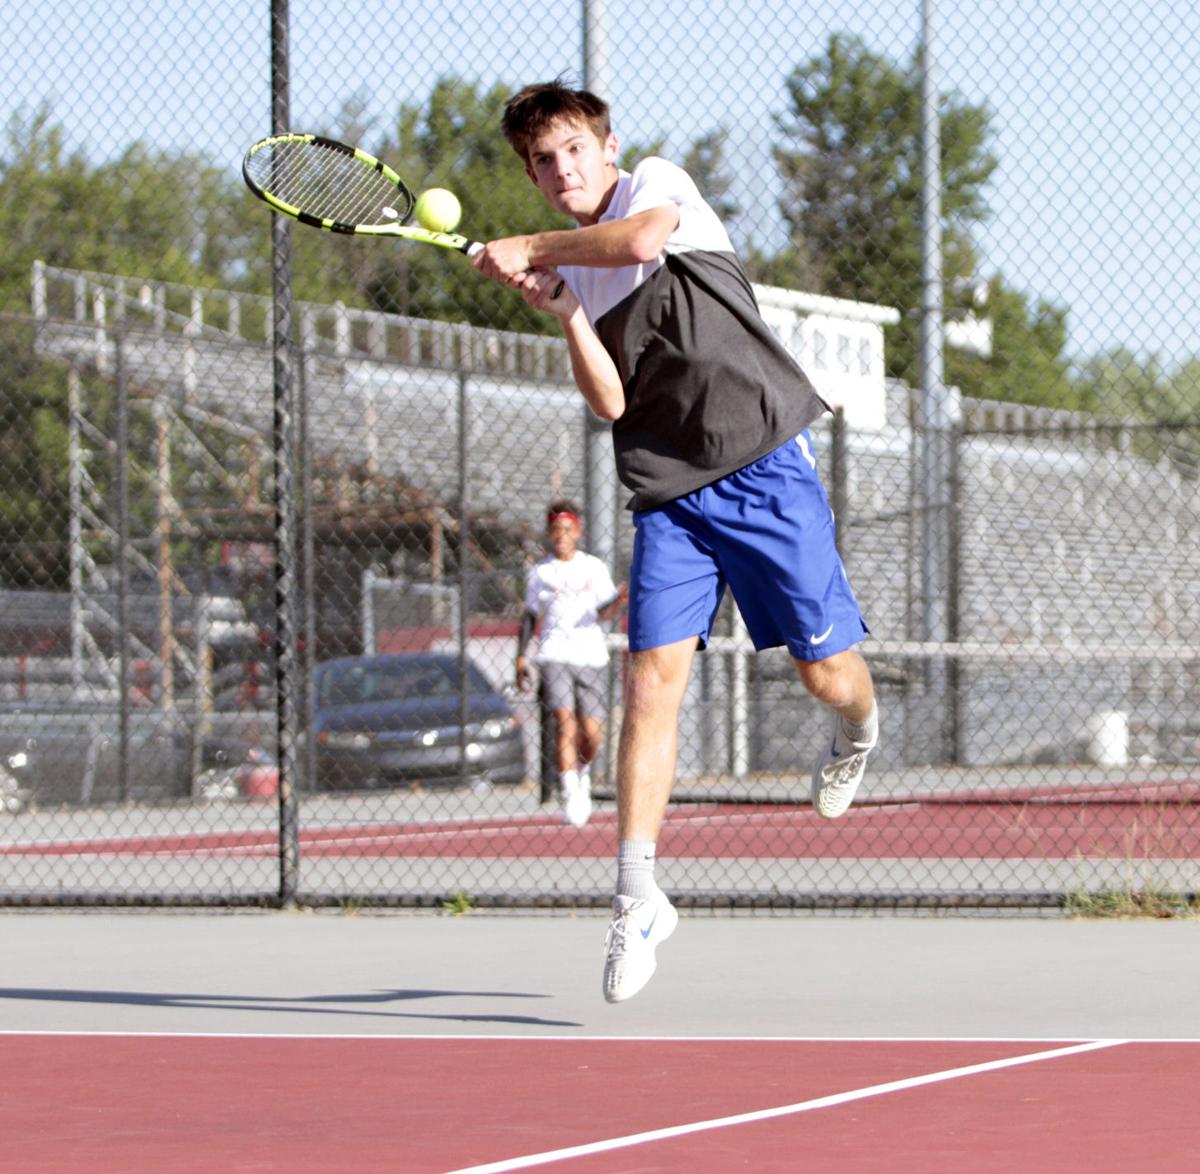 BOYS #39 TENNIS: Jeff #39 s doubles squads highlight 5 0 win against Silver